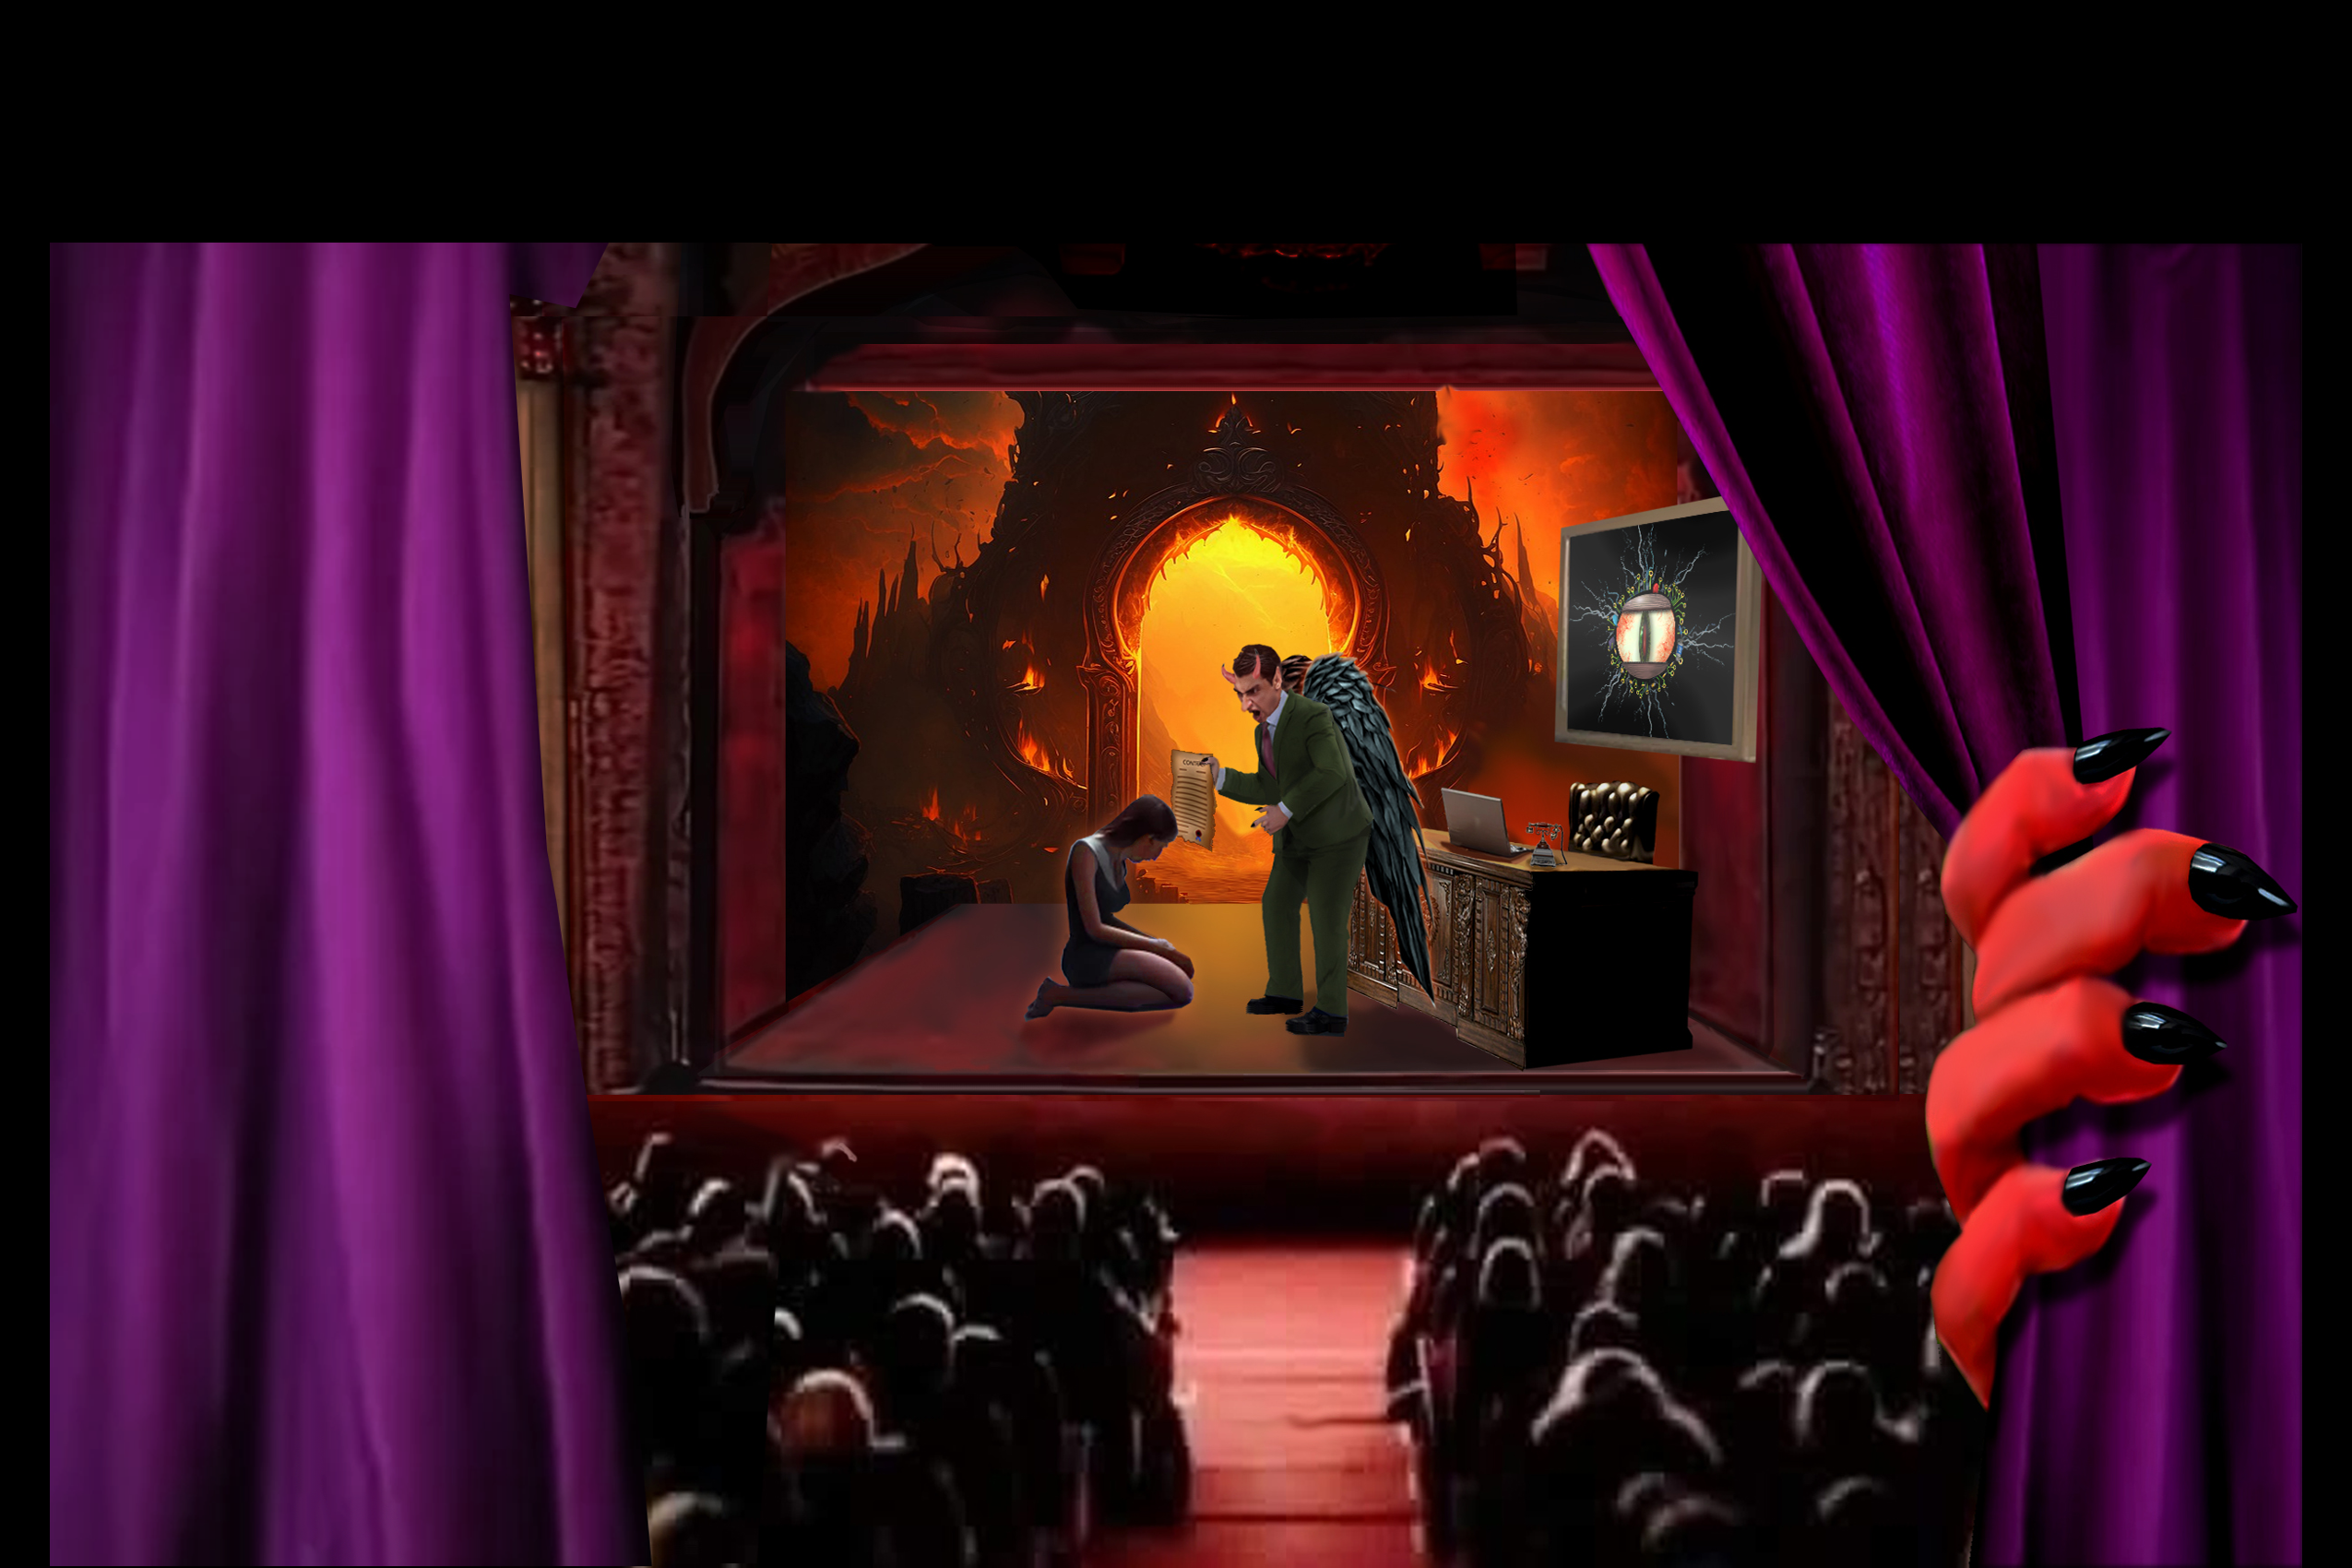 Artistic rendering of a stage play, with the devil holding a contract as a woman kneels in front of his desk, while the crowd watches and a slightly creepy red hand pulls back the stage curtains